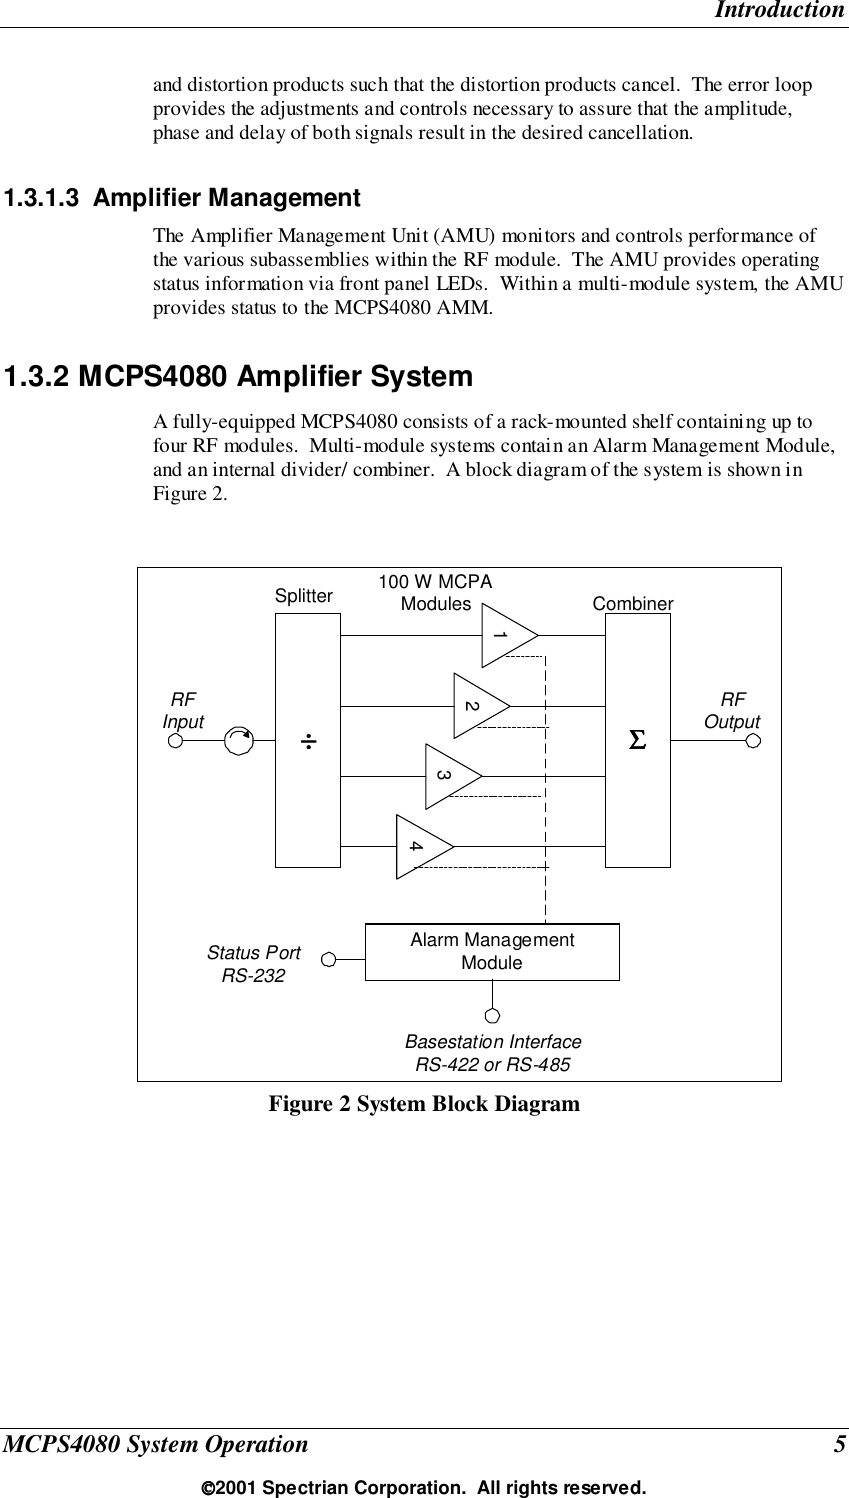 IntroductionMCPS4080 System Operation 52001 Spectrian Corporation.  All rights reserved.and distortion products such that the distortion products cancel.  The error loopprovides the adjustments and controls necessary to assure that the amplitude,phase and delay of both signals result in the desired cancellation.1.3.1.3 Amplifier ManagementThe Amplifier Management Unit (AMU) monitors and controls performance ofthe various subassemblies within the RF module.  The AMU provides operatingstatus information via front panel LEDs.  Within a multi-module system, the AMUprovides status to the MCPS4080 AMM.1.3.2 MCPS4080 Amplifier SystemA fully-equipped MCPS4080 consists of a rack-mounted shelf containing up tofour RF modules.  Multi-module systems contain an Alarm Management Module,and an internal divider/ combiner.  A block diagram of the system is shown inFigure 2.Figure 2 System Block Diagram2÷÷÷÷100 W MCPAModules341Alarm ManagementModuleSplitterBasestation InterfaceRS-422 or RS-485ΣΣΣΣCombinerRFInput RFOutputStatus PortRS-232